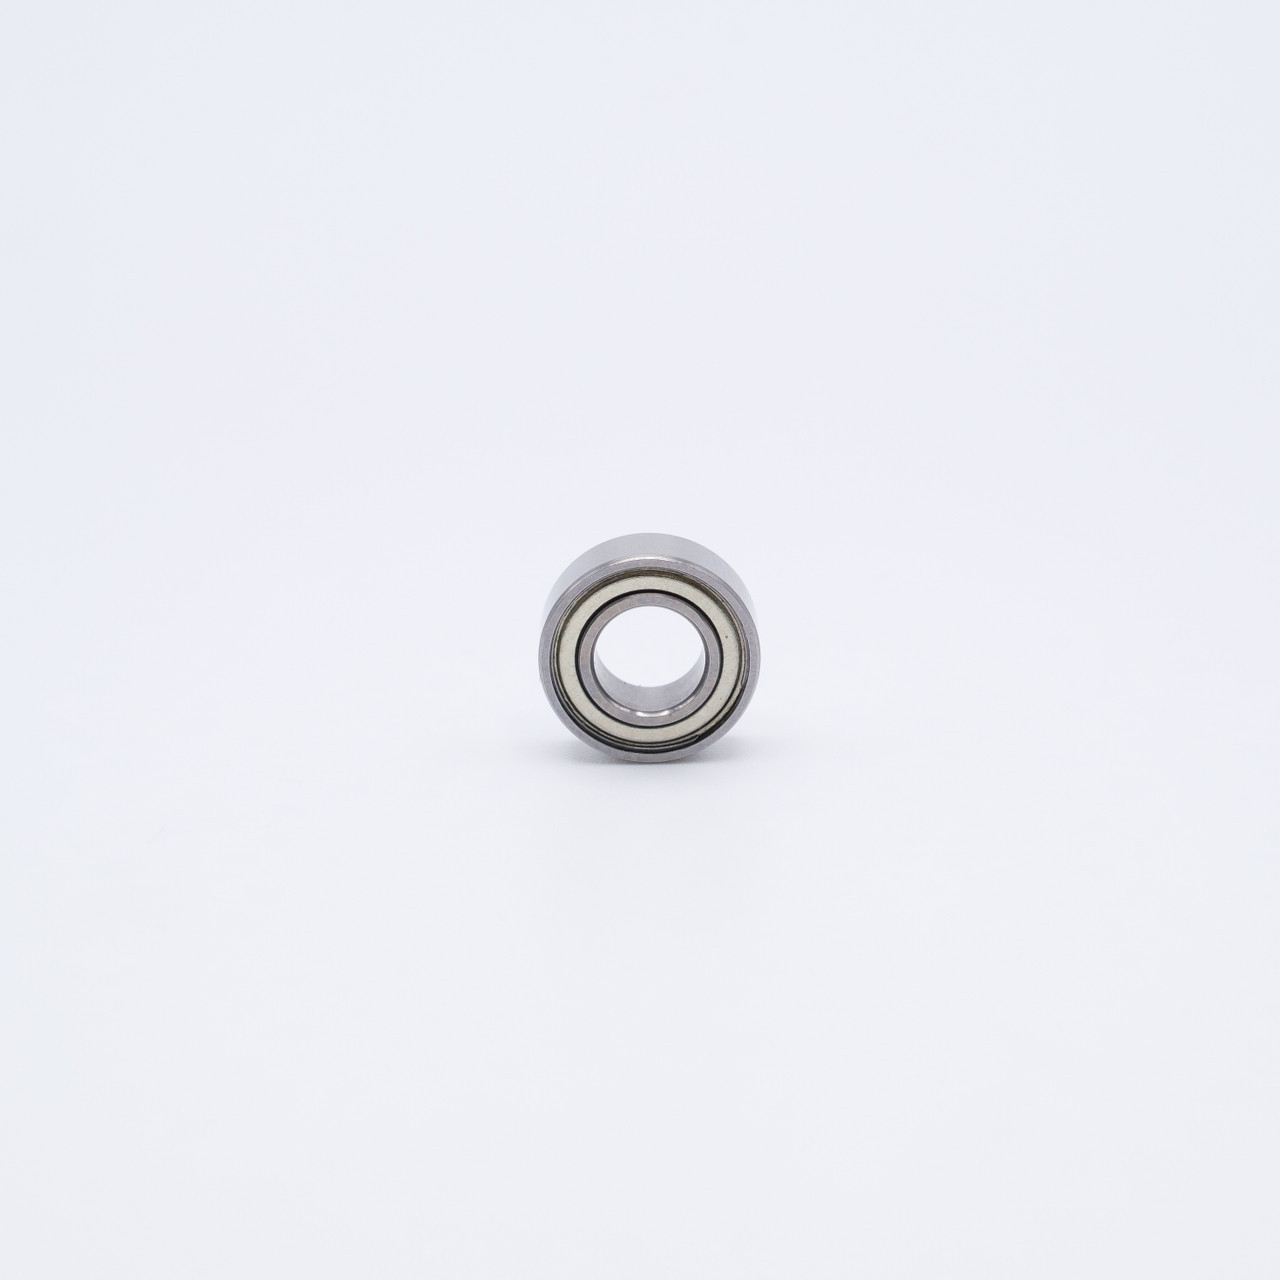 SMR83-ZZ Stainless Steel Miniature Ball Bearing 3x8x3mm Front View